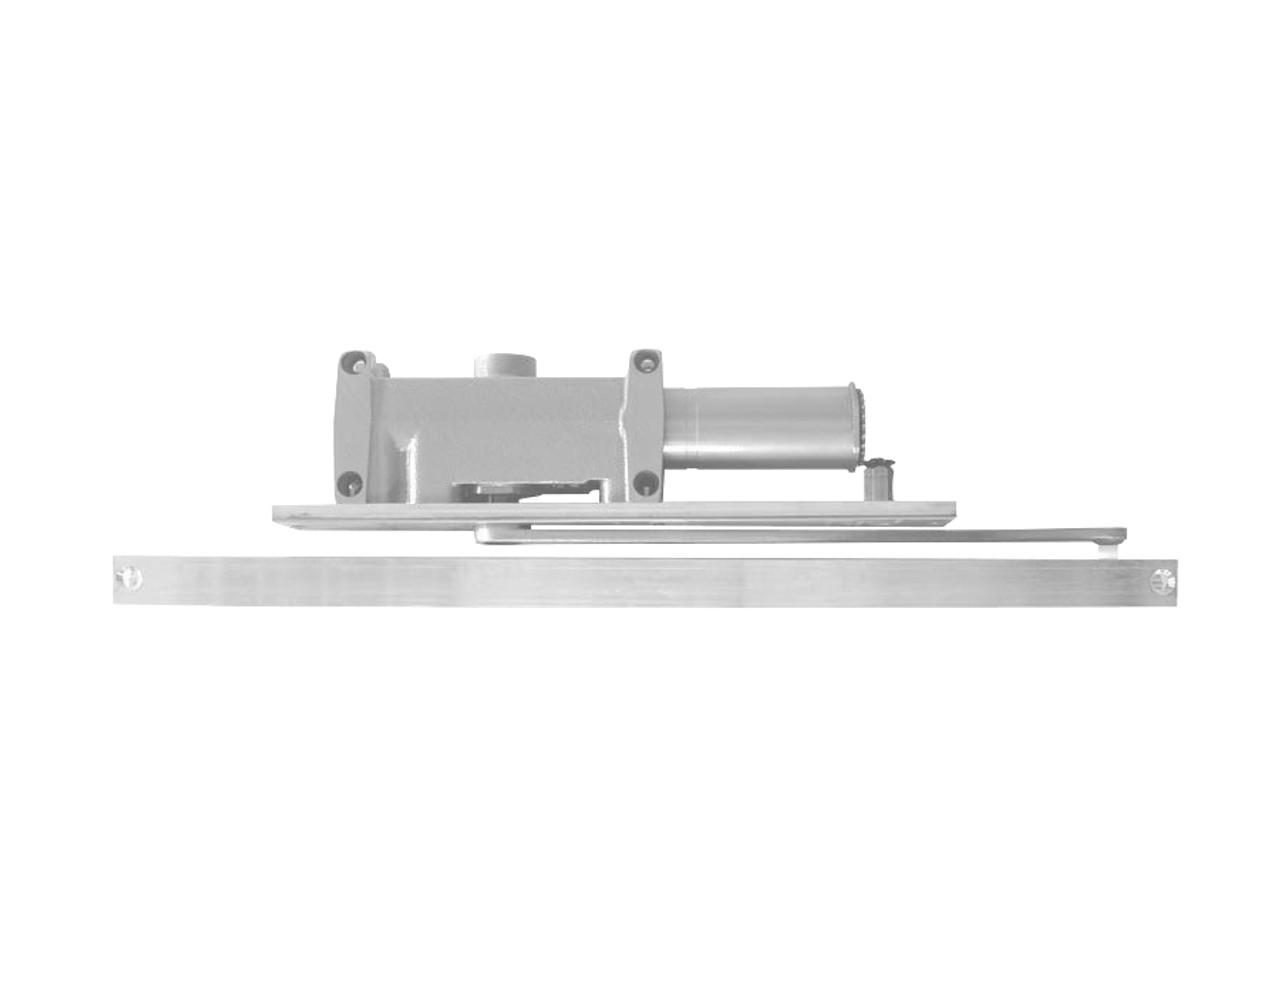 2016-H-BUMPER-RH-US26D LCN Door Closer Hold Open Track with BUMPER in Satin Chrome Finish